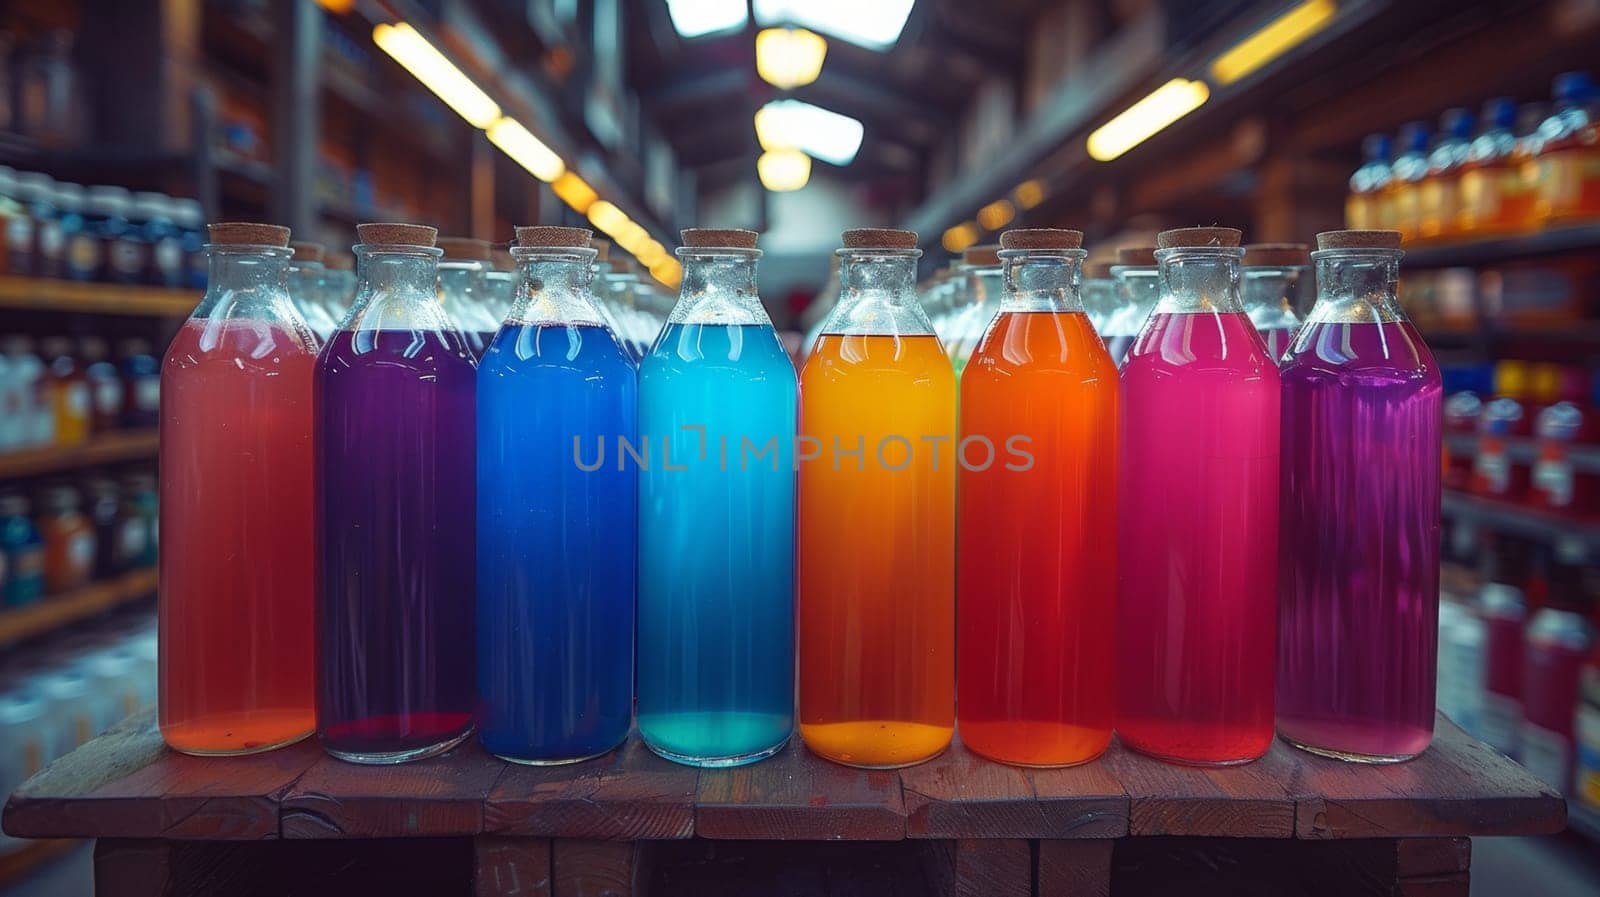 A row of bottles filled with different colored liquids on a shelf, AI by starush